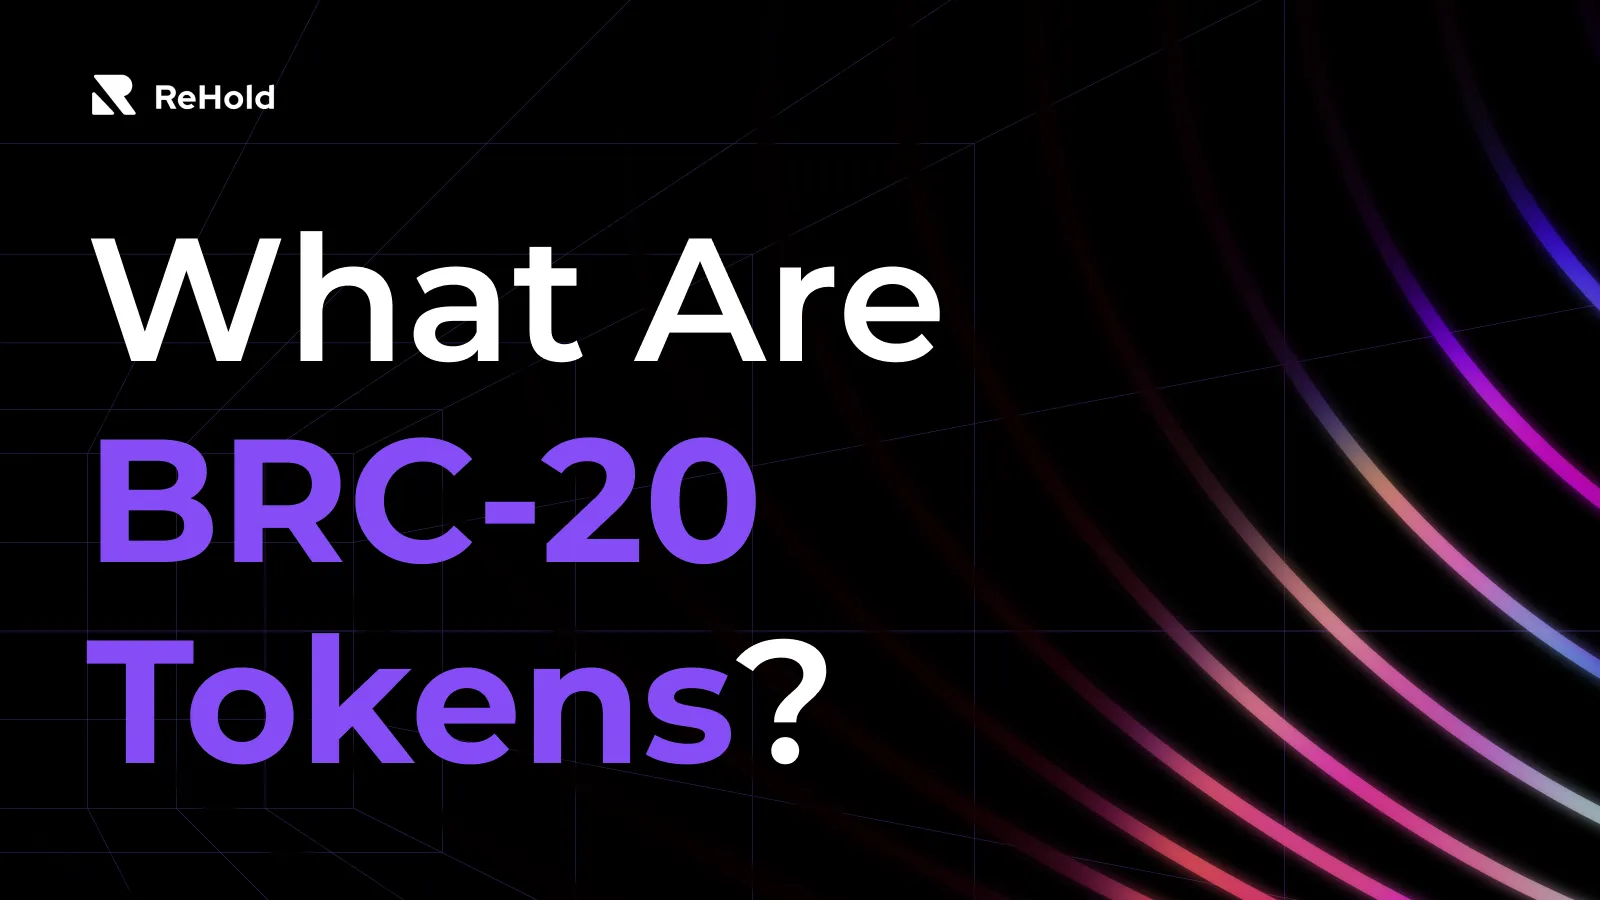 What Are BRC-20 Tokens